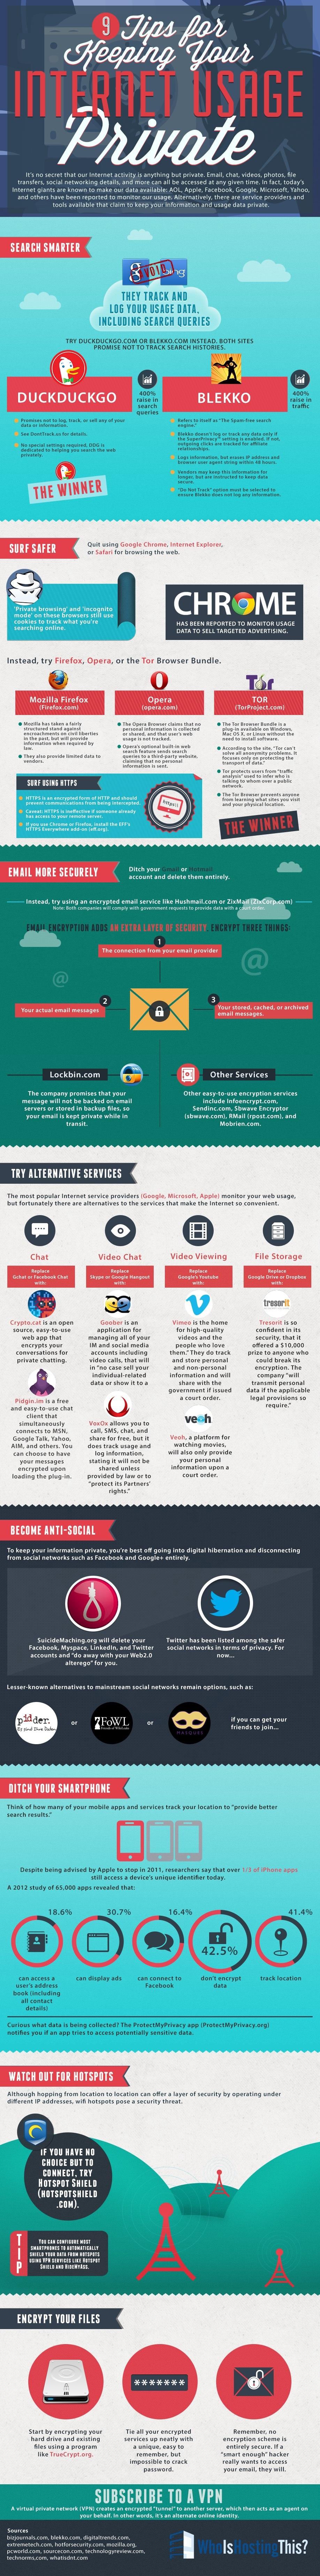 9 Tips To Help You Keep Your Internet Footprint Private [Infographic]